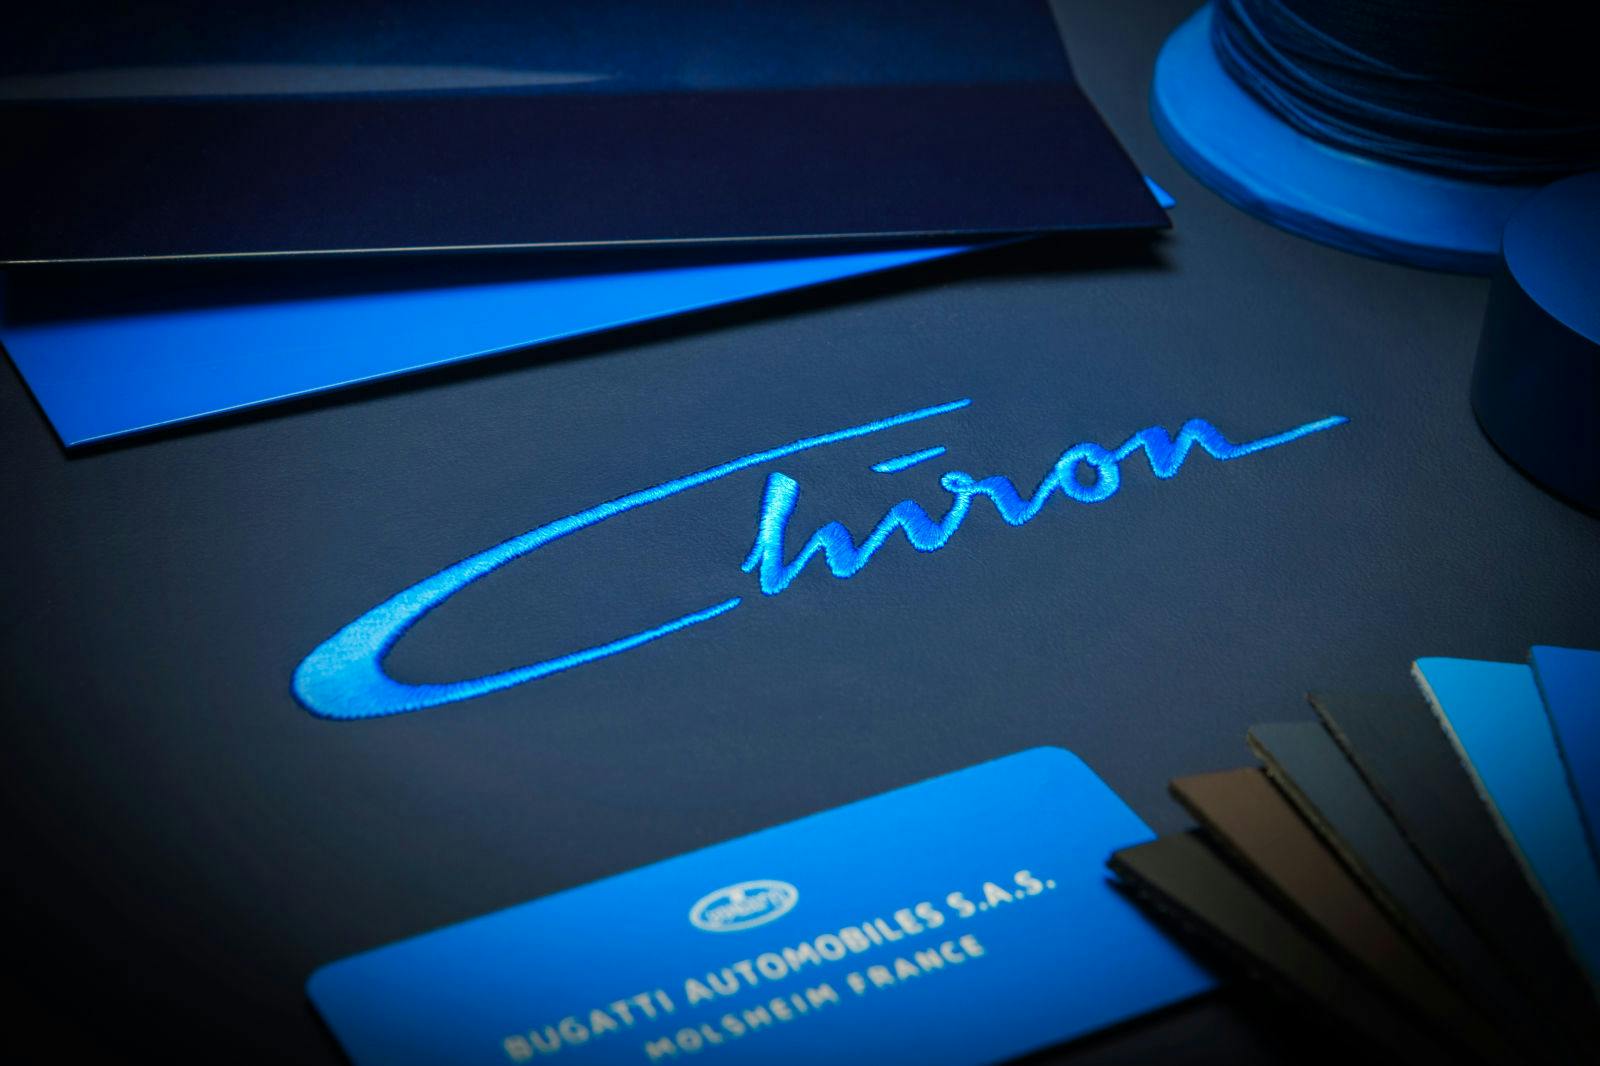 An abstracted form of Louis Chiron’s signature will be found as stitching on the headrest of the new Bugatti super sports car.